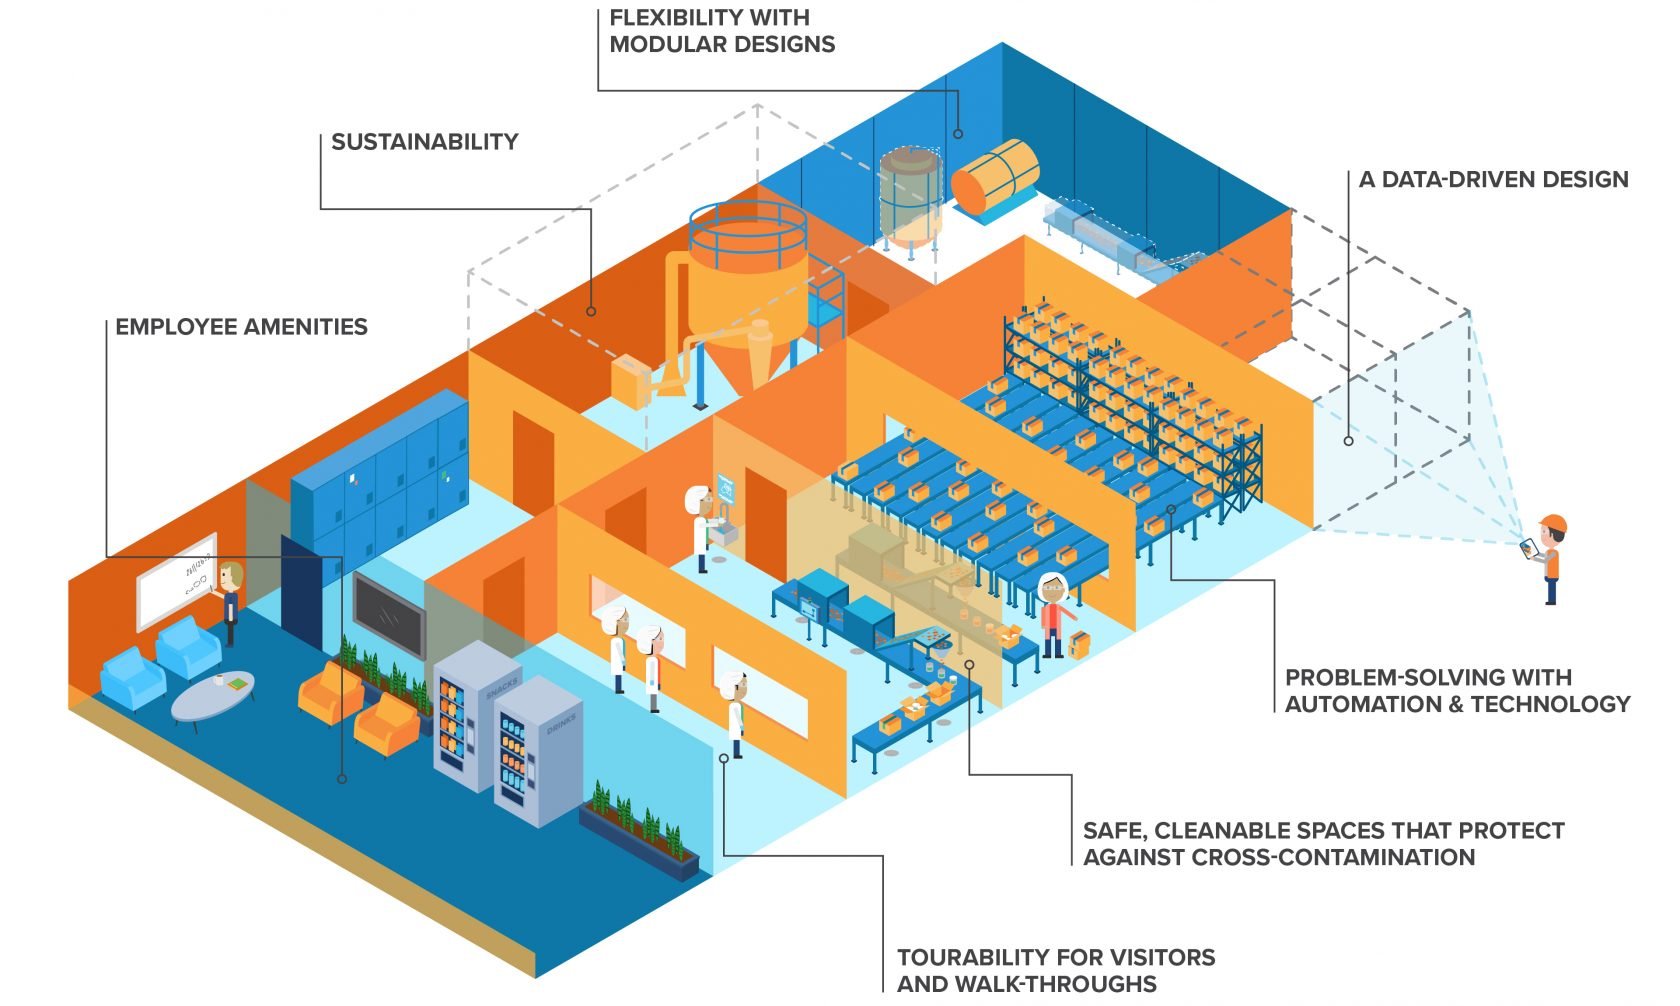 business plan for food processing industry